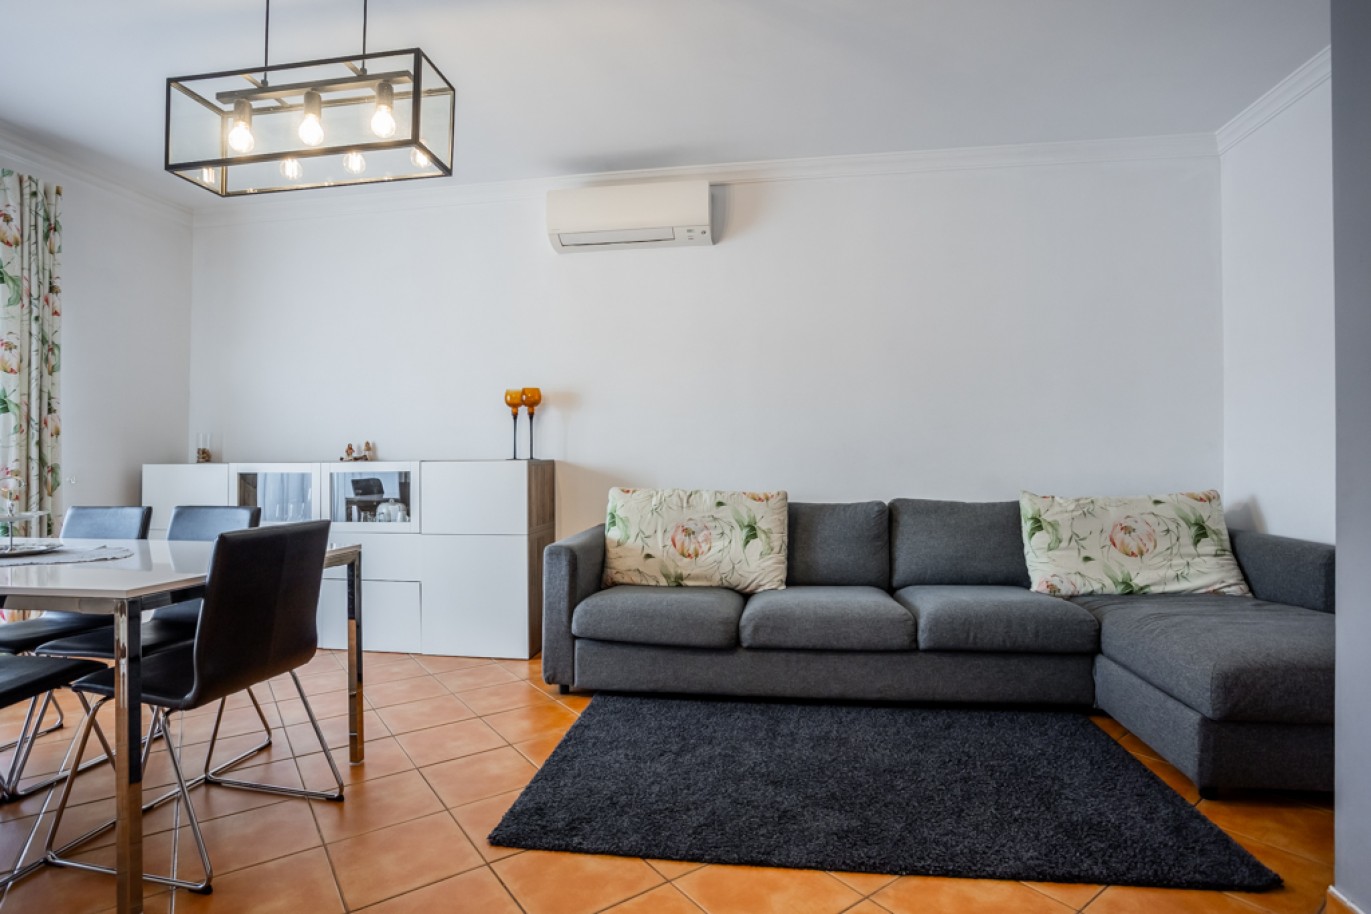 2-Bedroom Appartment with rooftop, for sale in Lagos, Algarve_267203